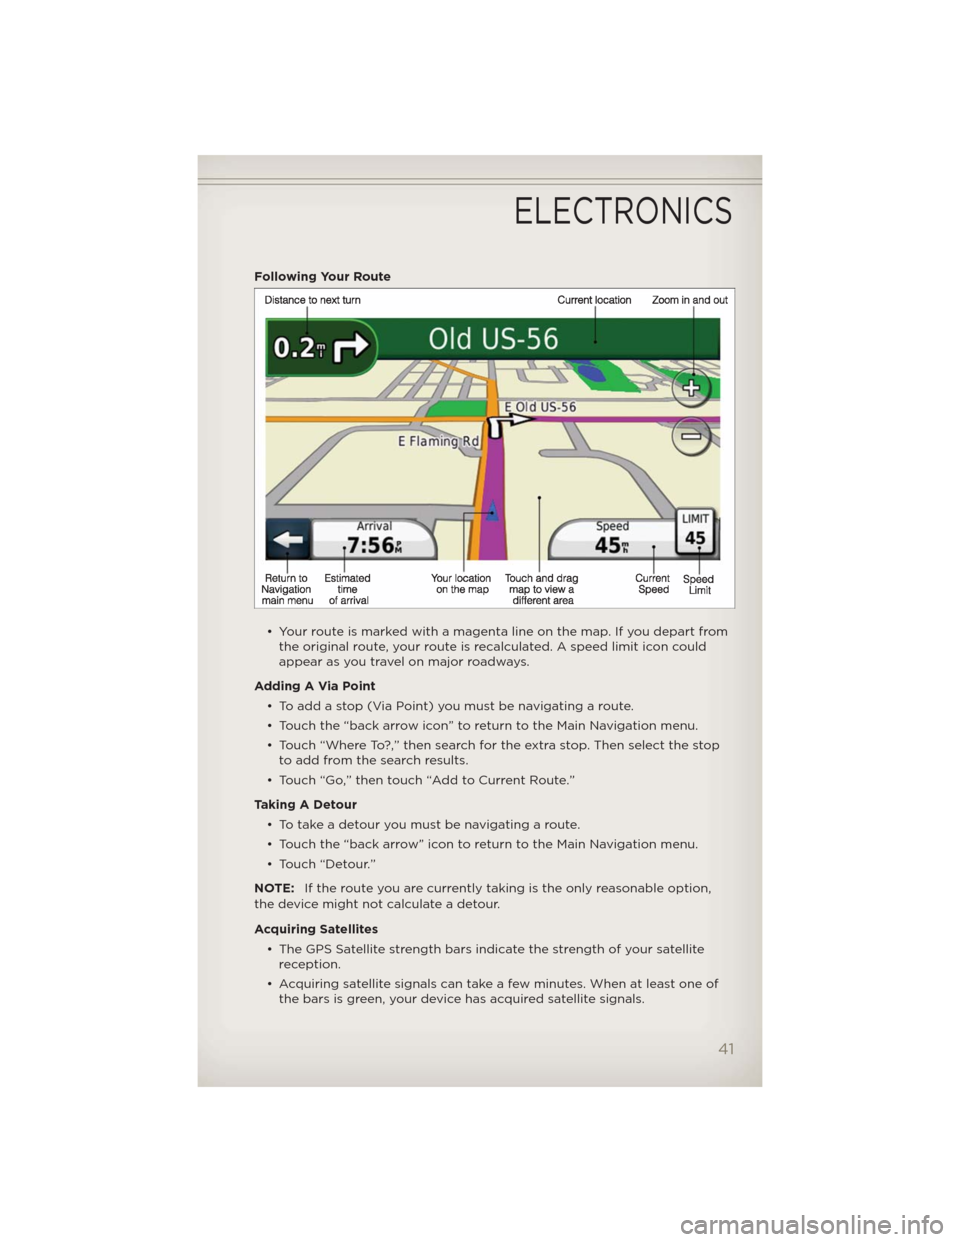 JEEP COMPASS 2012 1.G User Guide Following Your Route
• Your route is marked with a magenta line on the map. If you depart from
the original route, your route is recalculated. A speed limit icon could
appear as you travel on major 